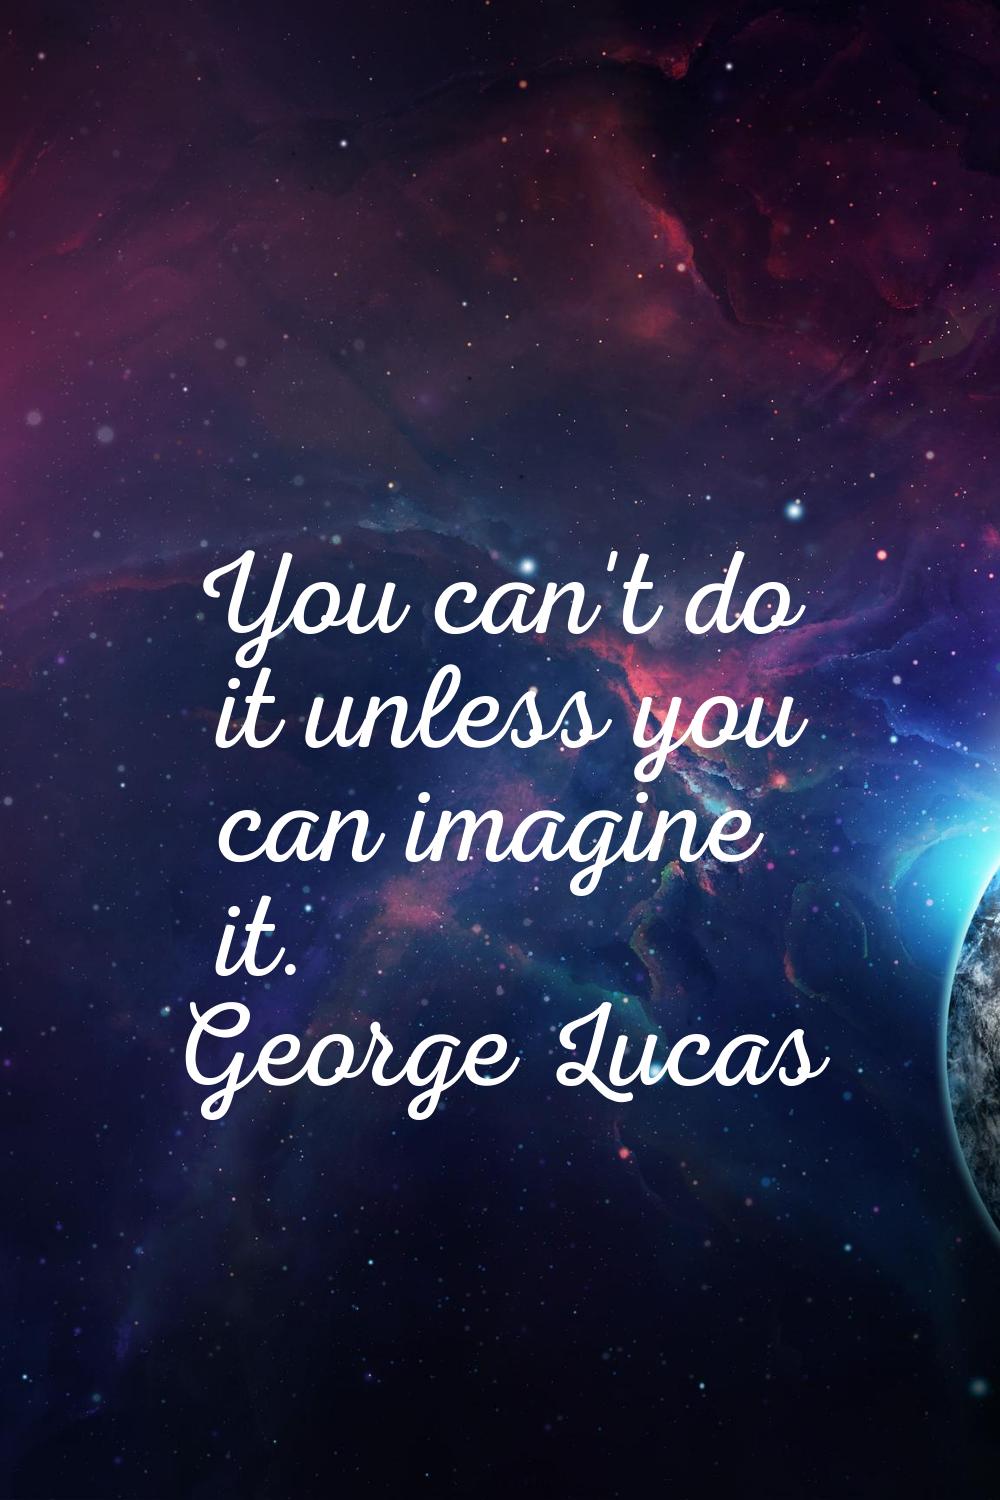 You can't do it unless you can imagine it.